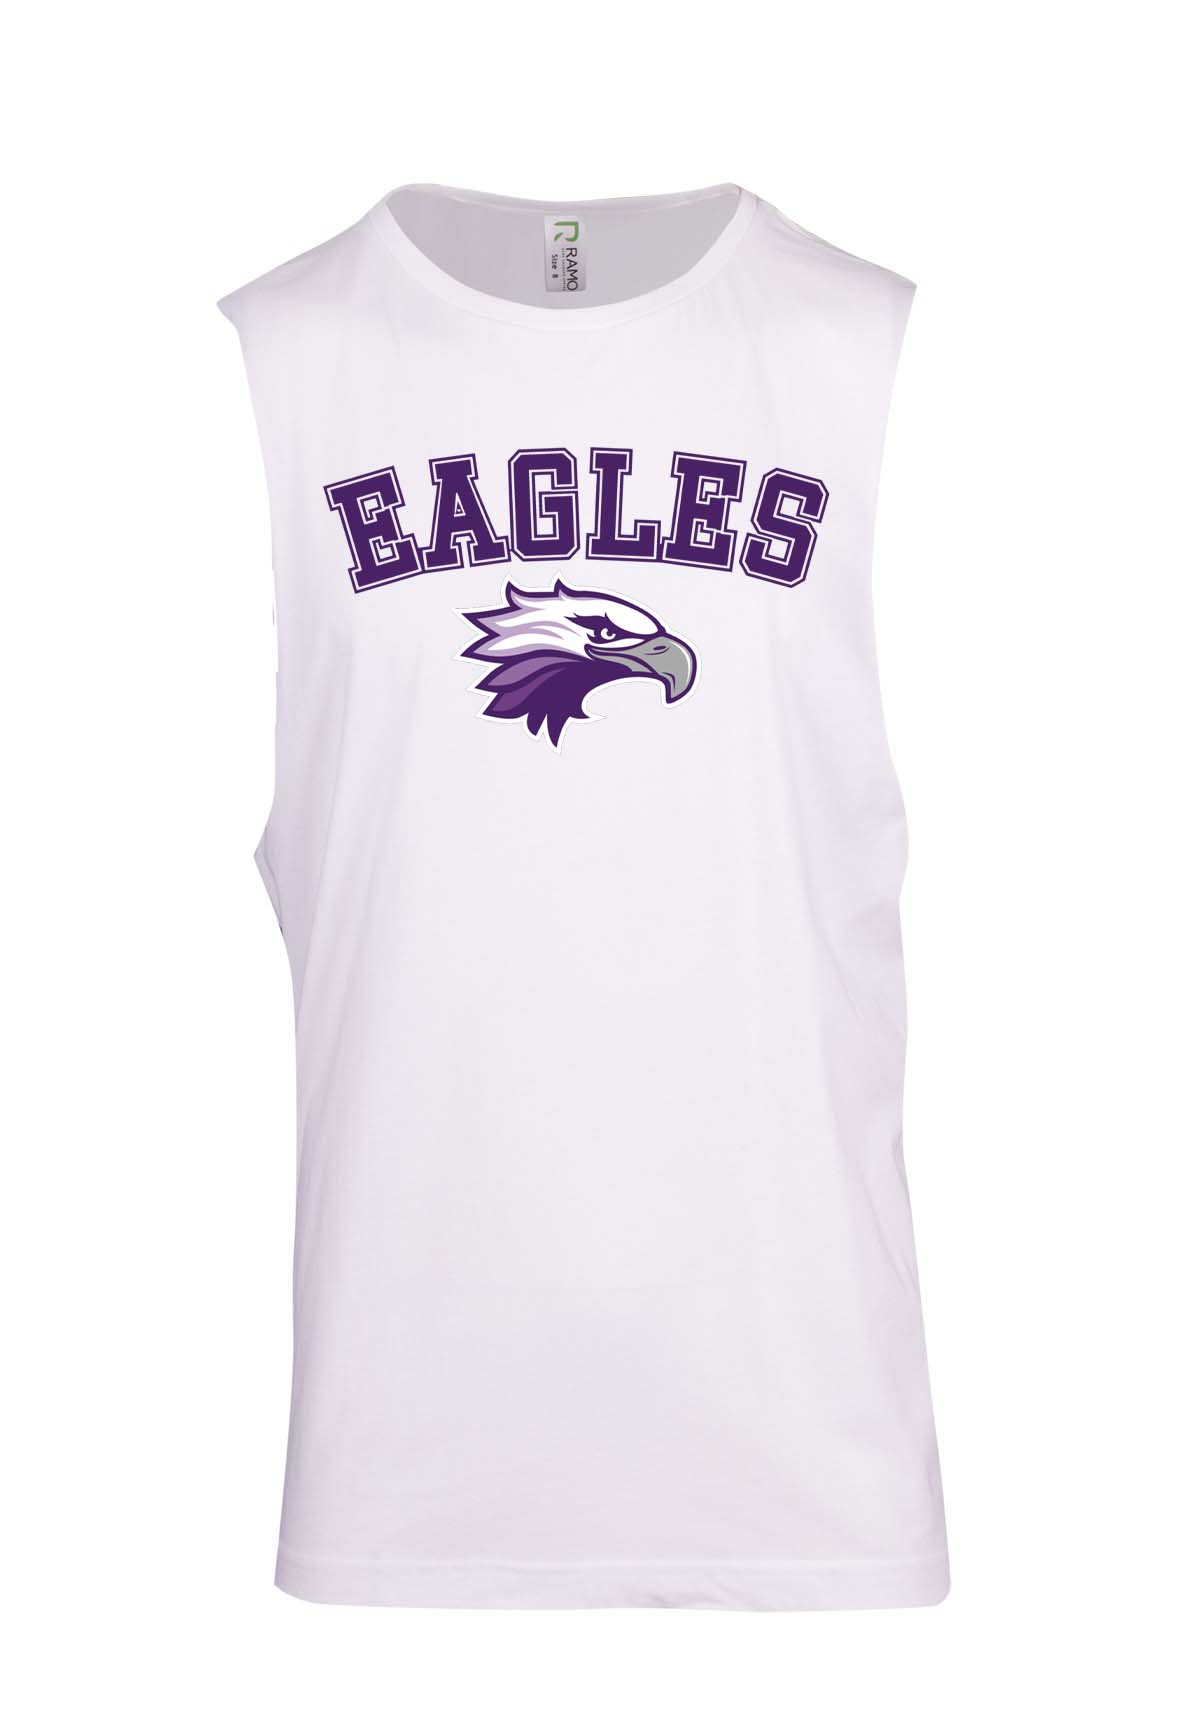 Eagles Curved Logo Muscle Tee